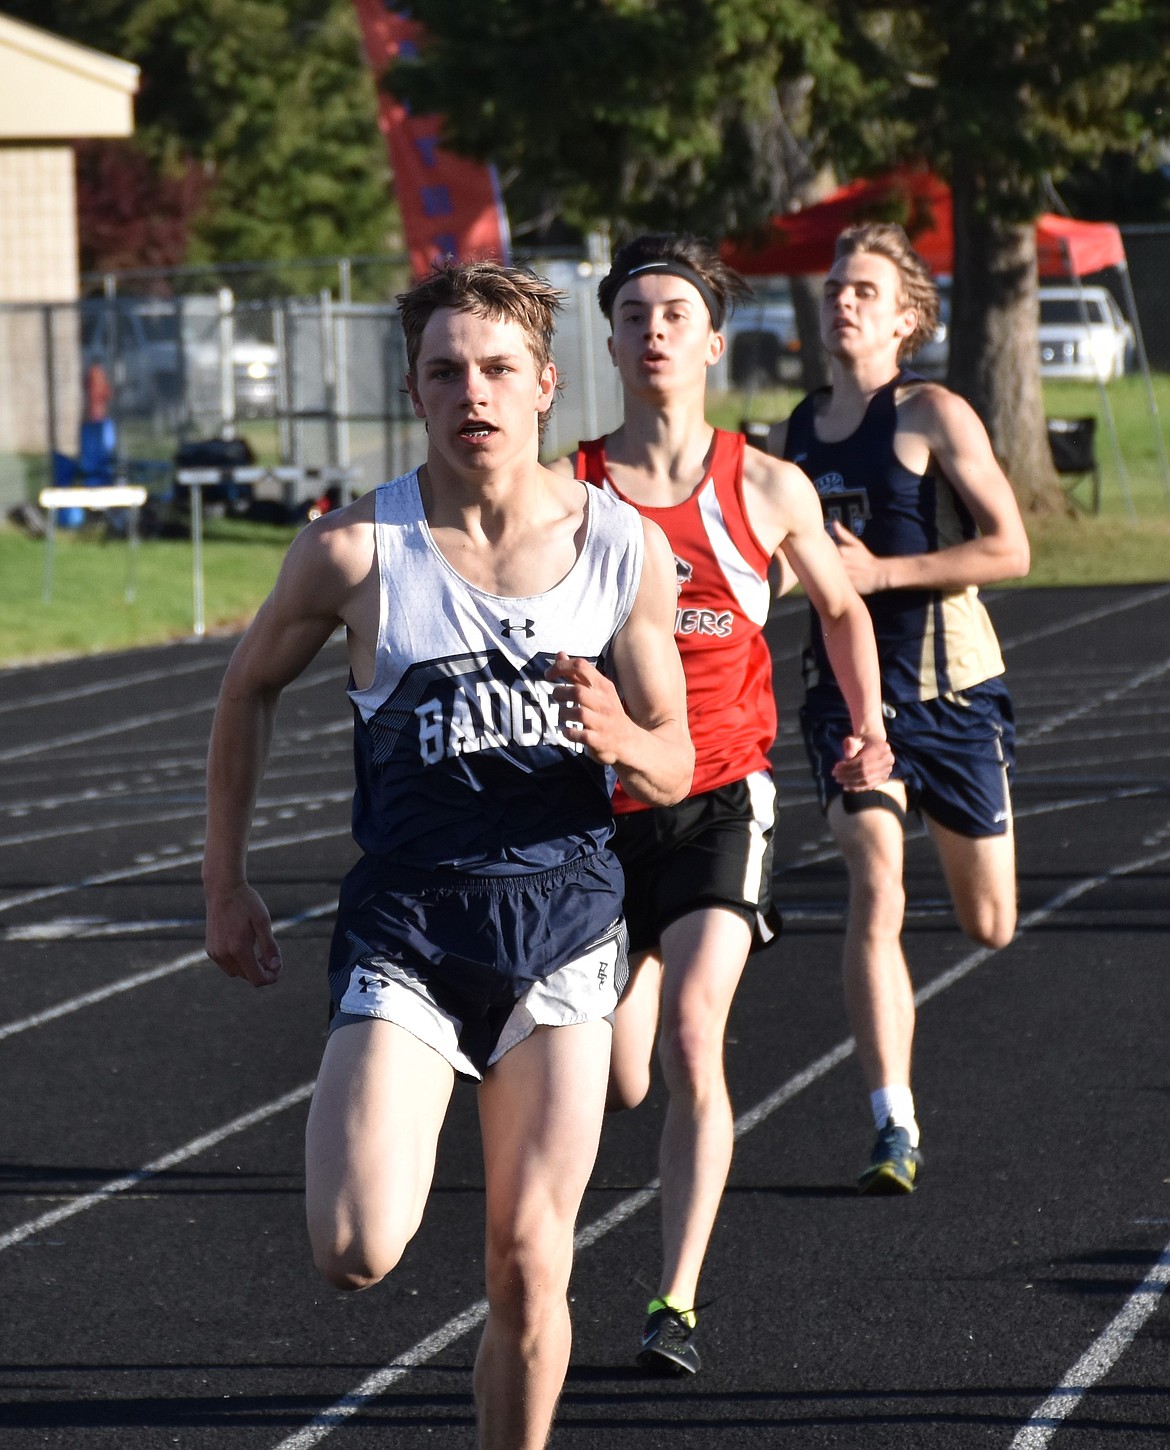 (Photo courtesy of Maureen Blackmore)
Charles Henslee 800m 1st District